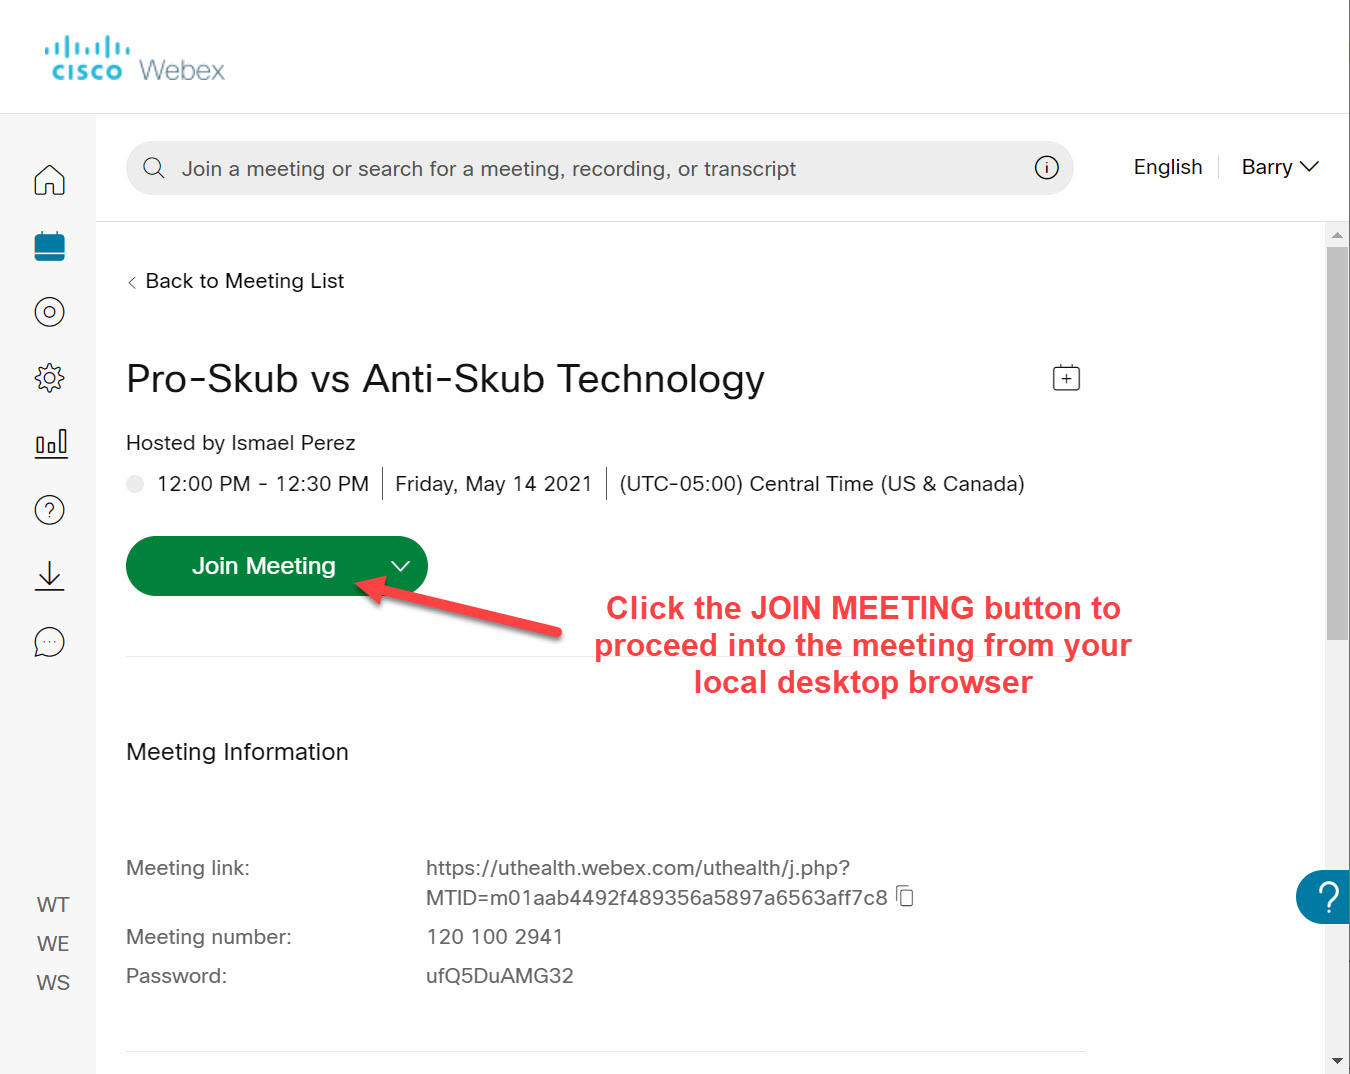 An email showing the location of the Join Meeting button inside a Webex interface, and advising the user to click that button.